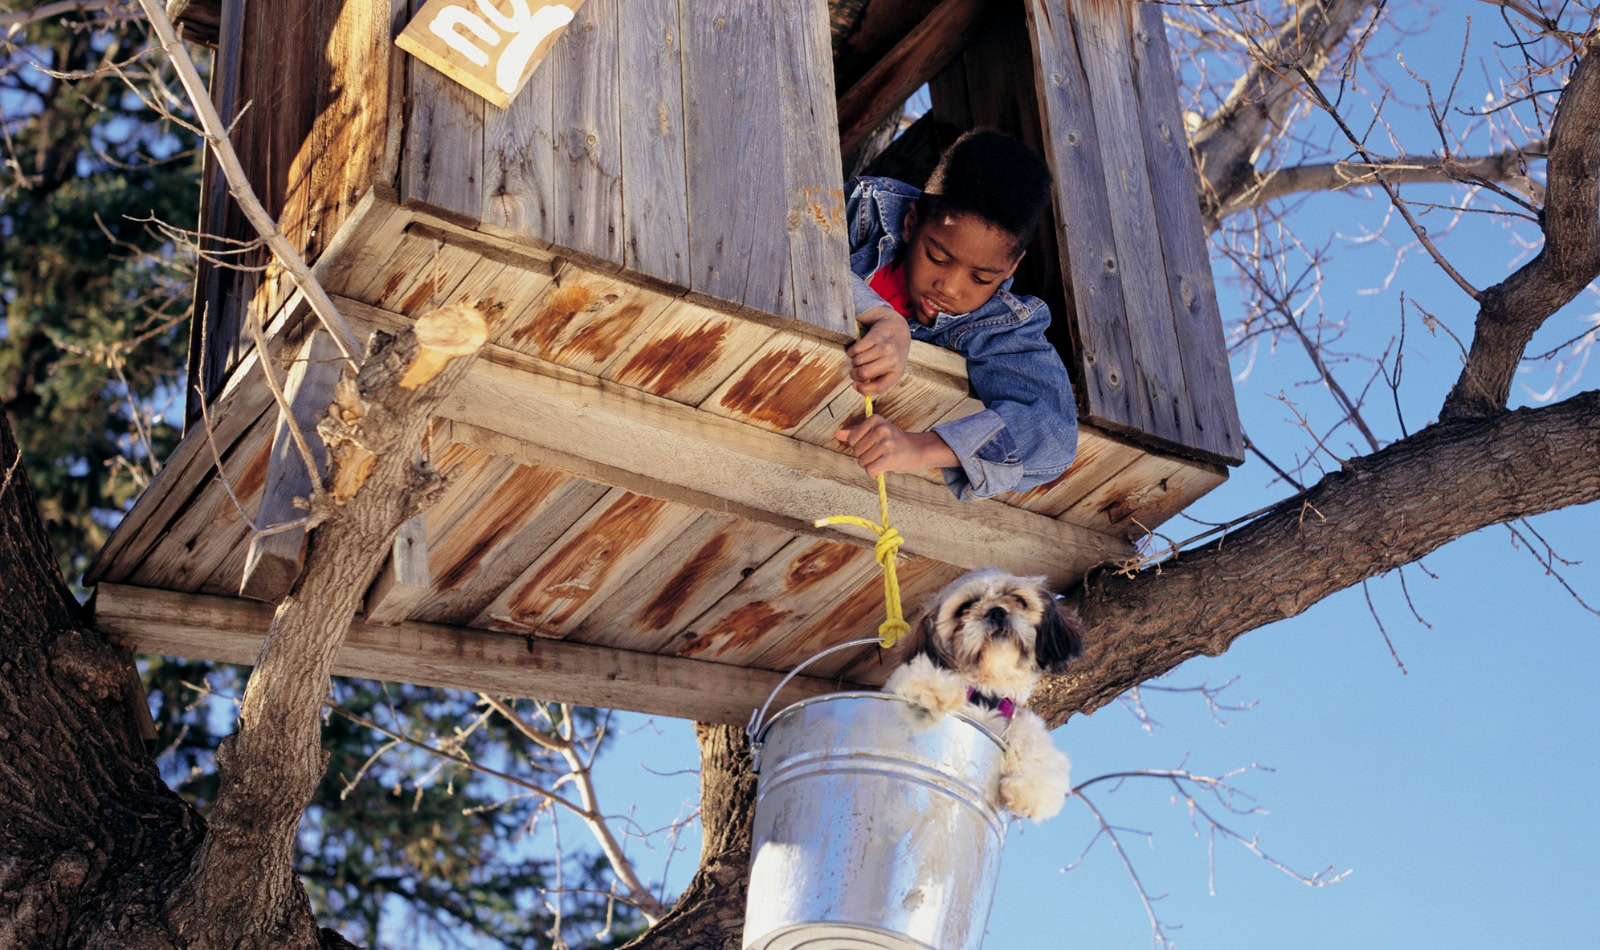 little boy and dog in a tree house